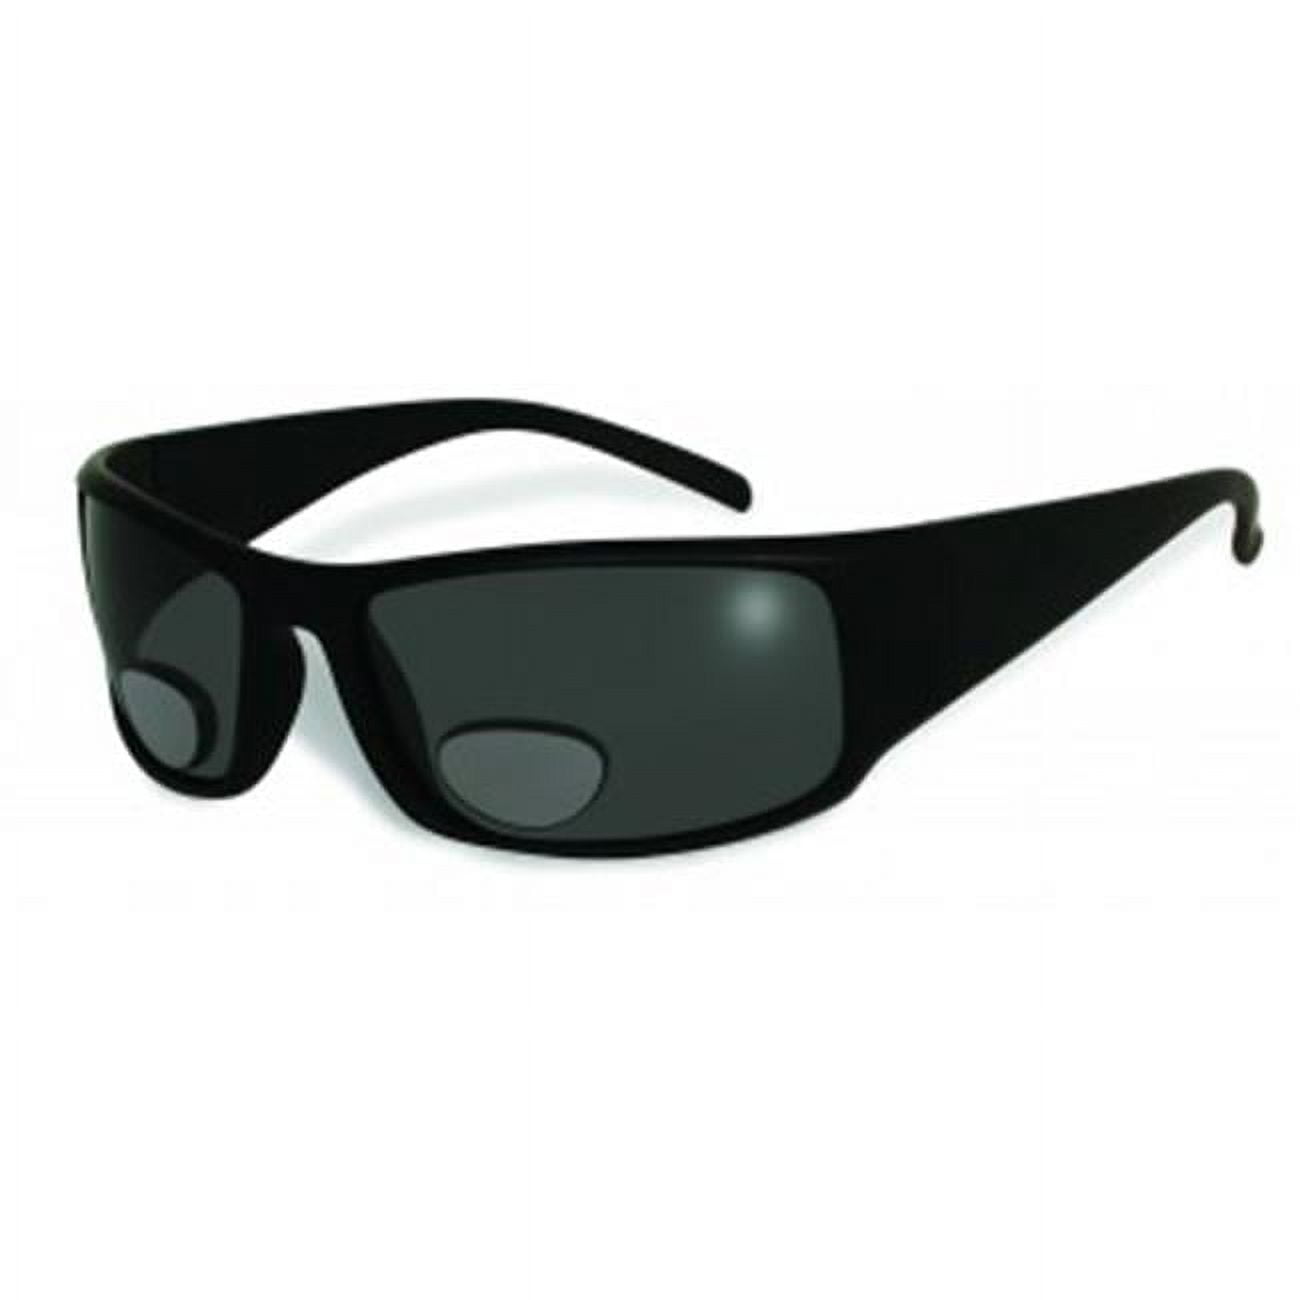 Bifocal Reading Sunglasses from £15.00 | Tiger Specs